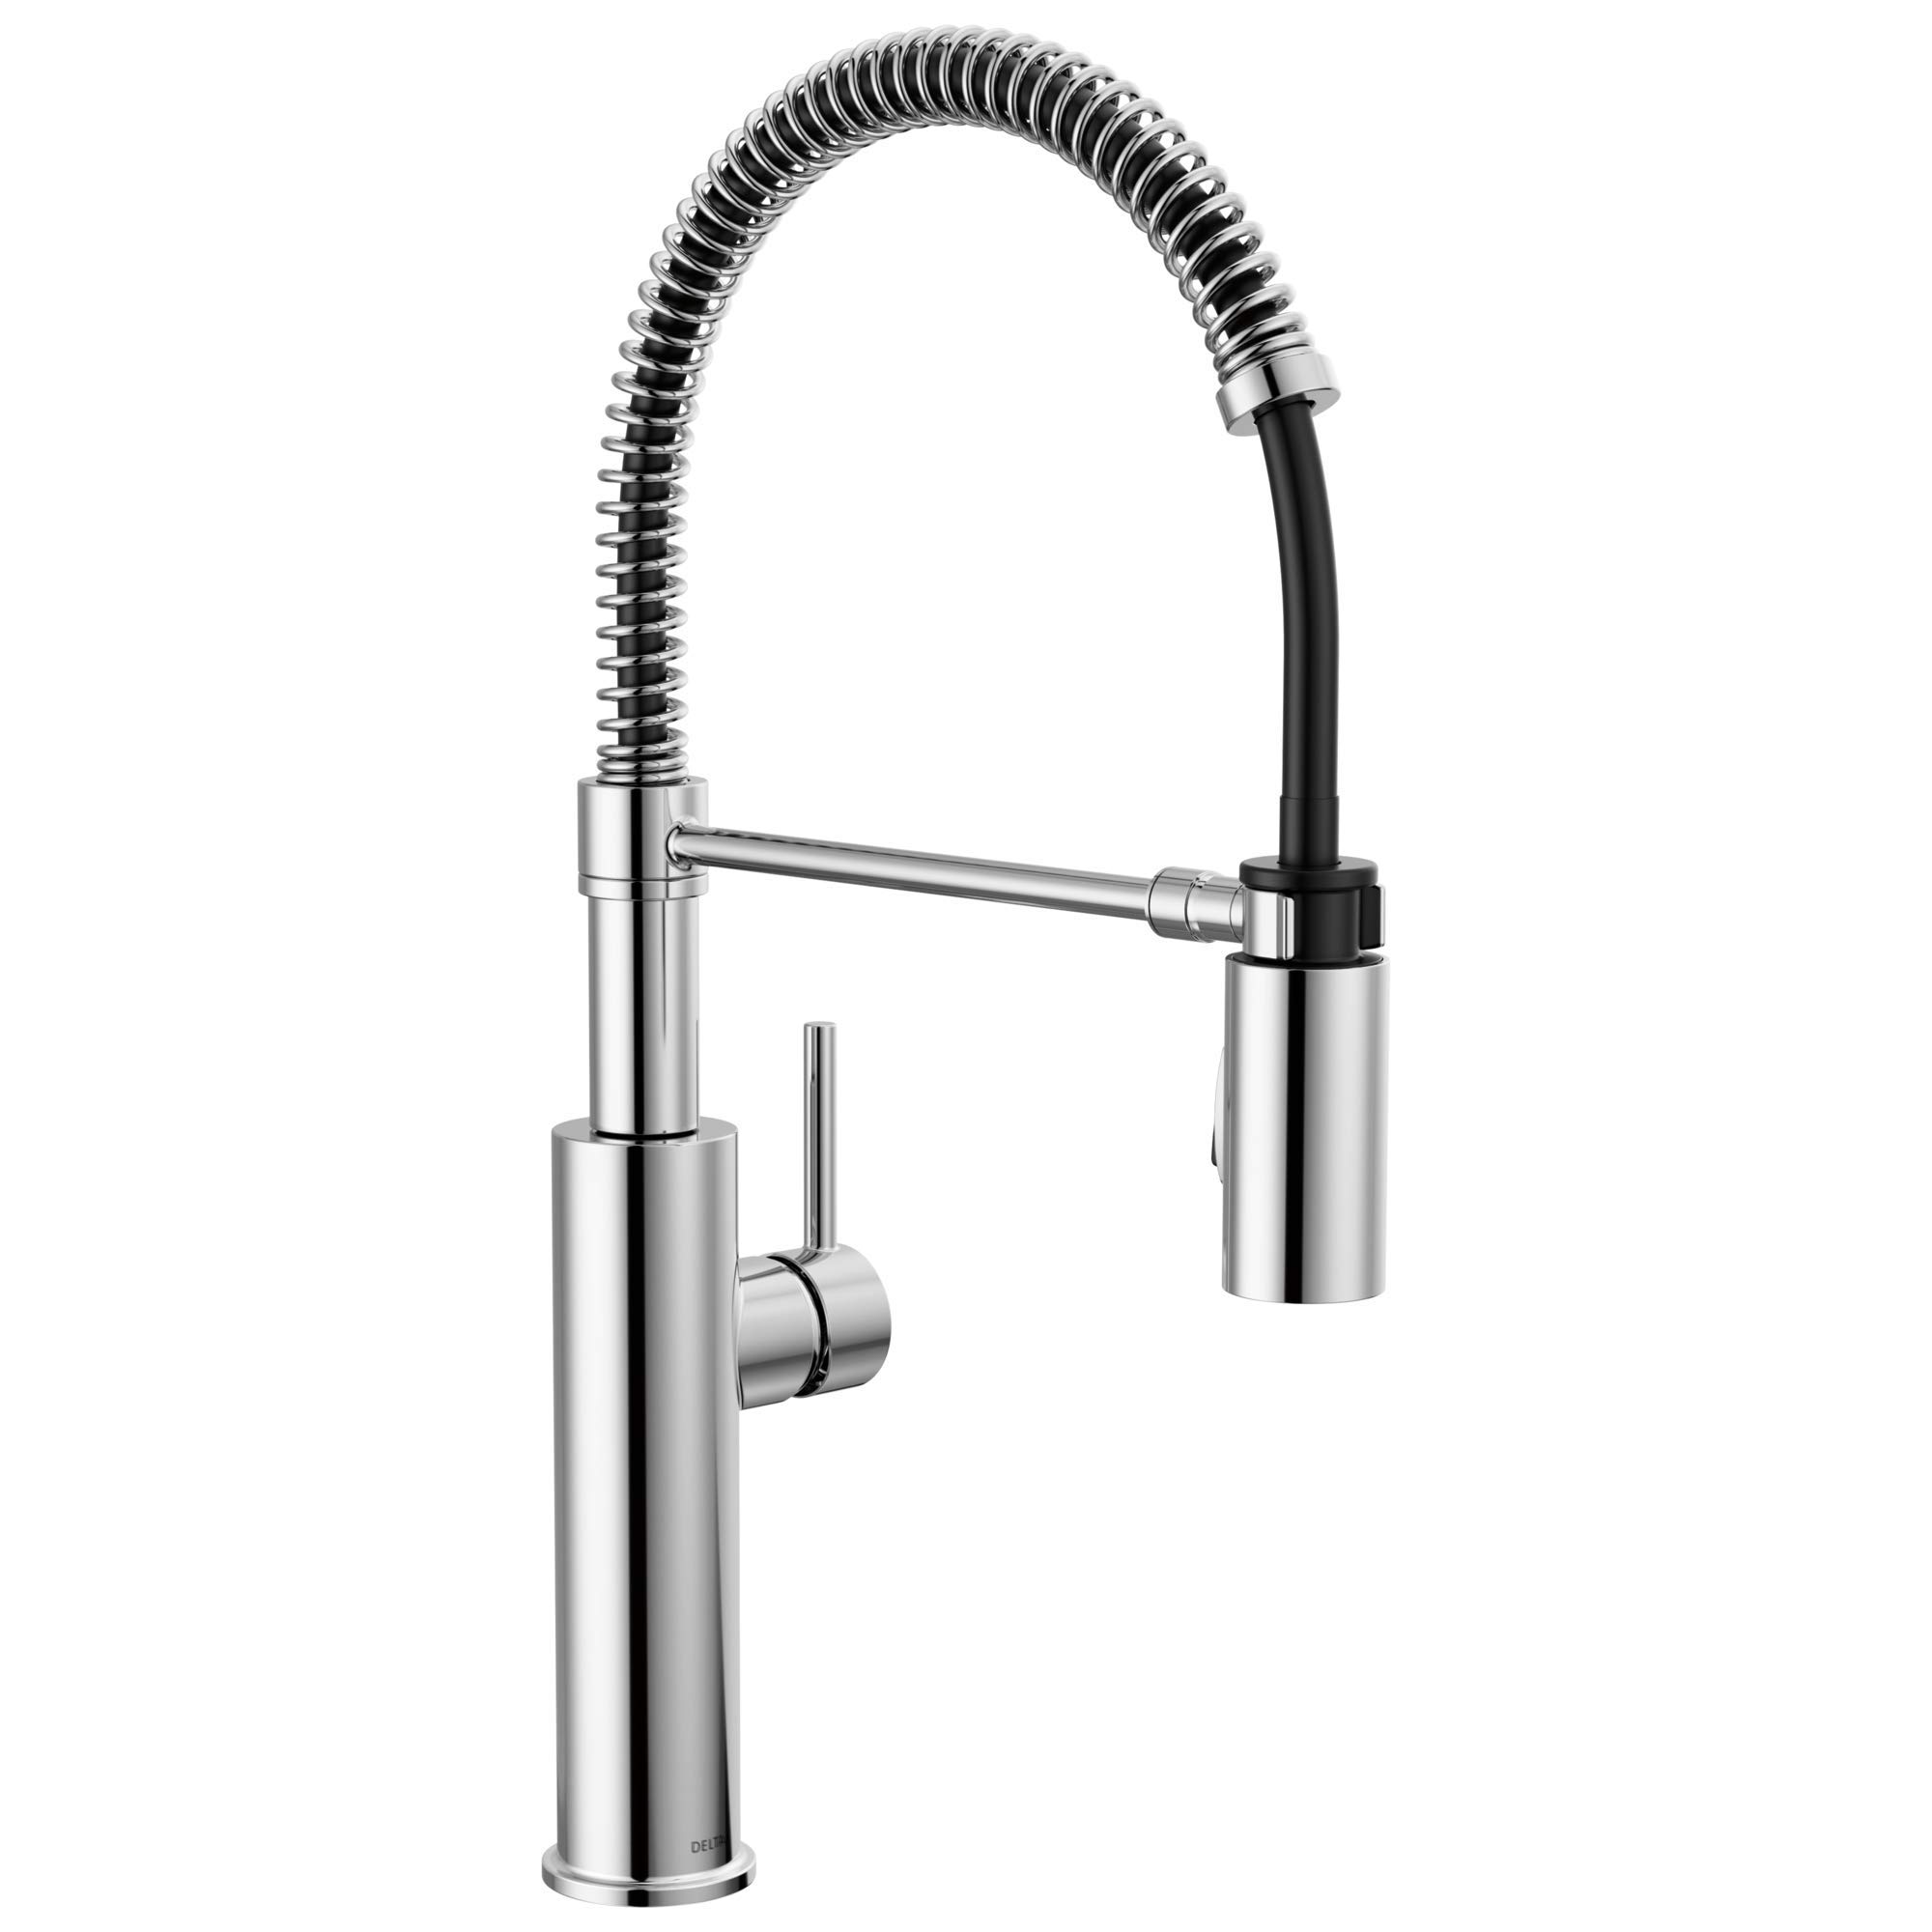 Delta Faucet Antoni Chrome Kitchen Faucet with Pull Down Sprayer, Commercial Style Kitchen Sink Faucet, Faucets for Kitchen Sinks, Single-Handle, Magnetic Docking Spray Head, Chrome 18803-DST